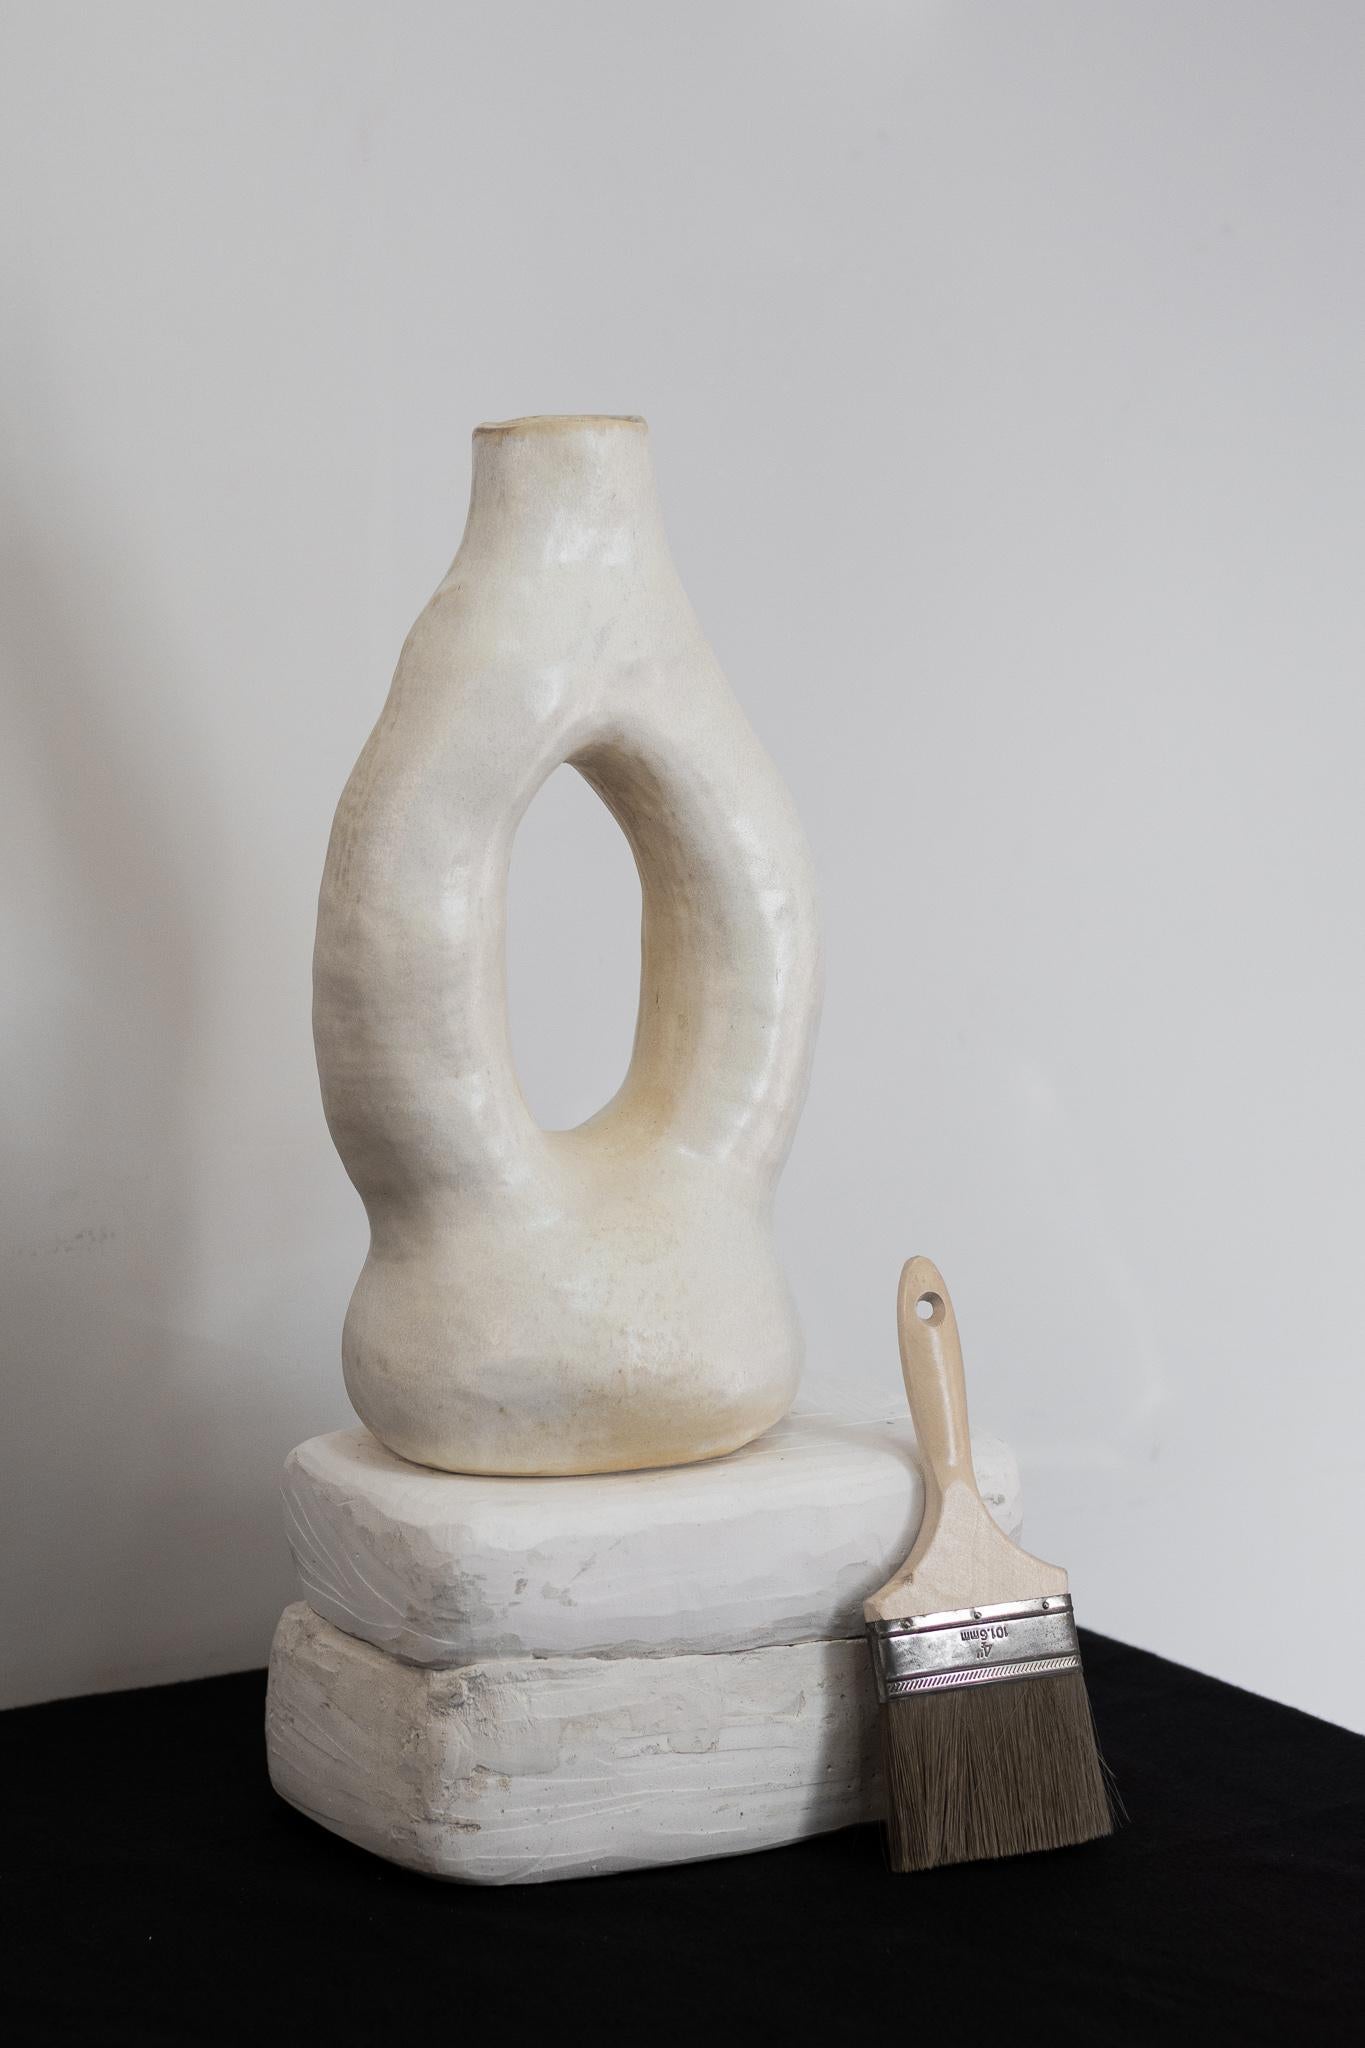 The vase from the Alba series, especially the N.1 vase, is a unique piece that embraces the artisanal process. Manufactured without the use of molds, each vase absorbs the distinct contours and textures of the artist's hand, resulting in a clean and